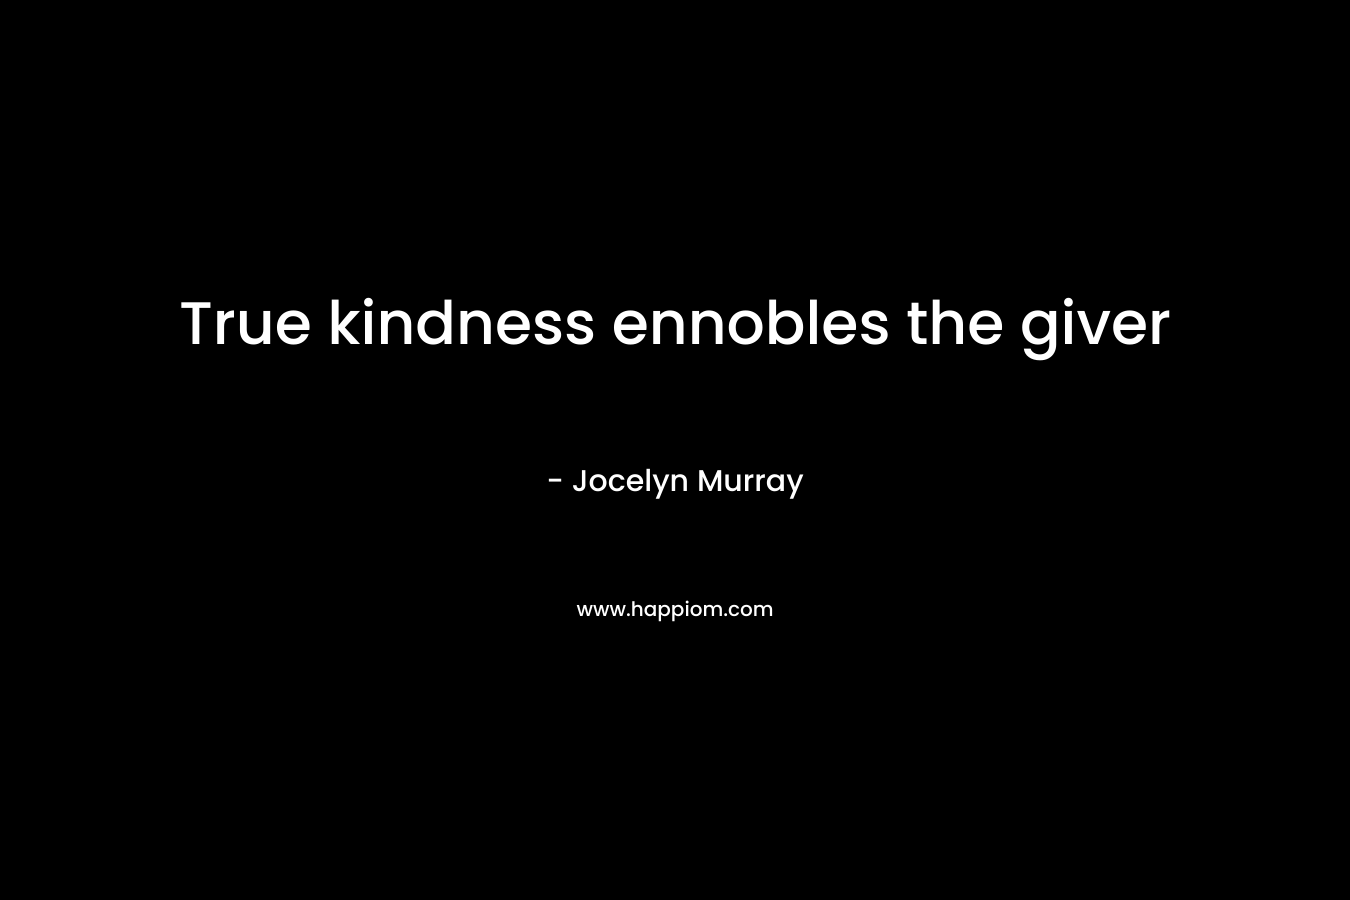 True kindness ennobles the giver